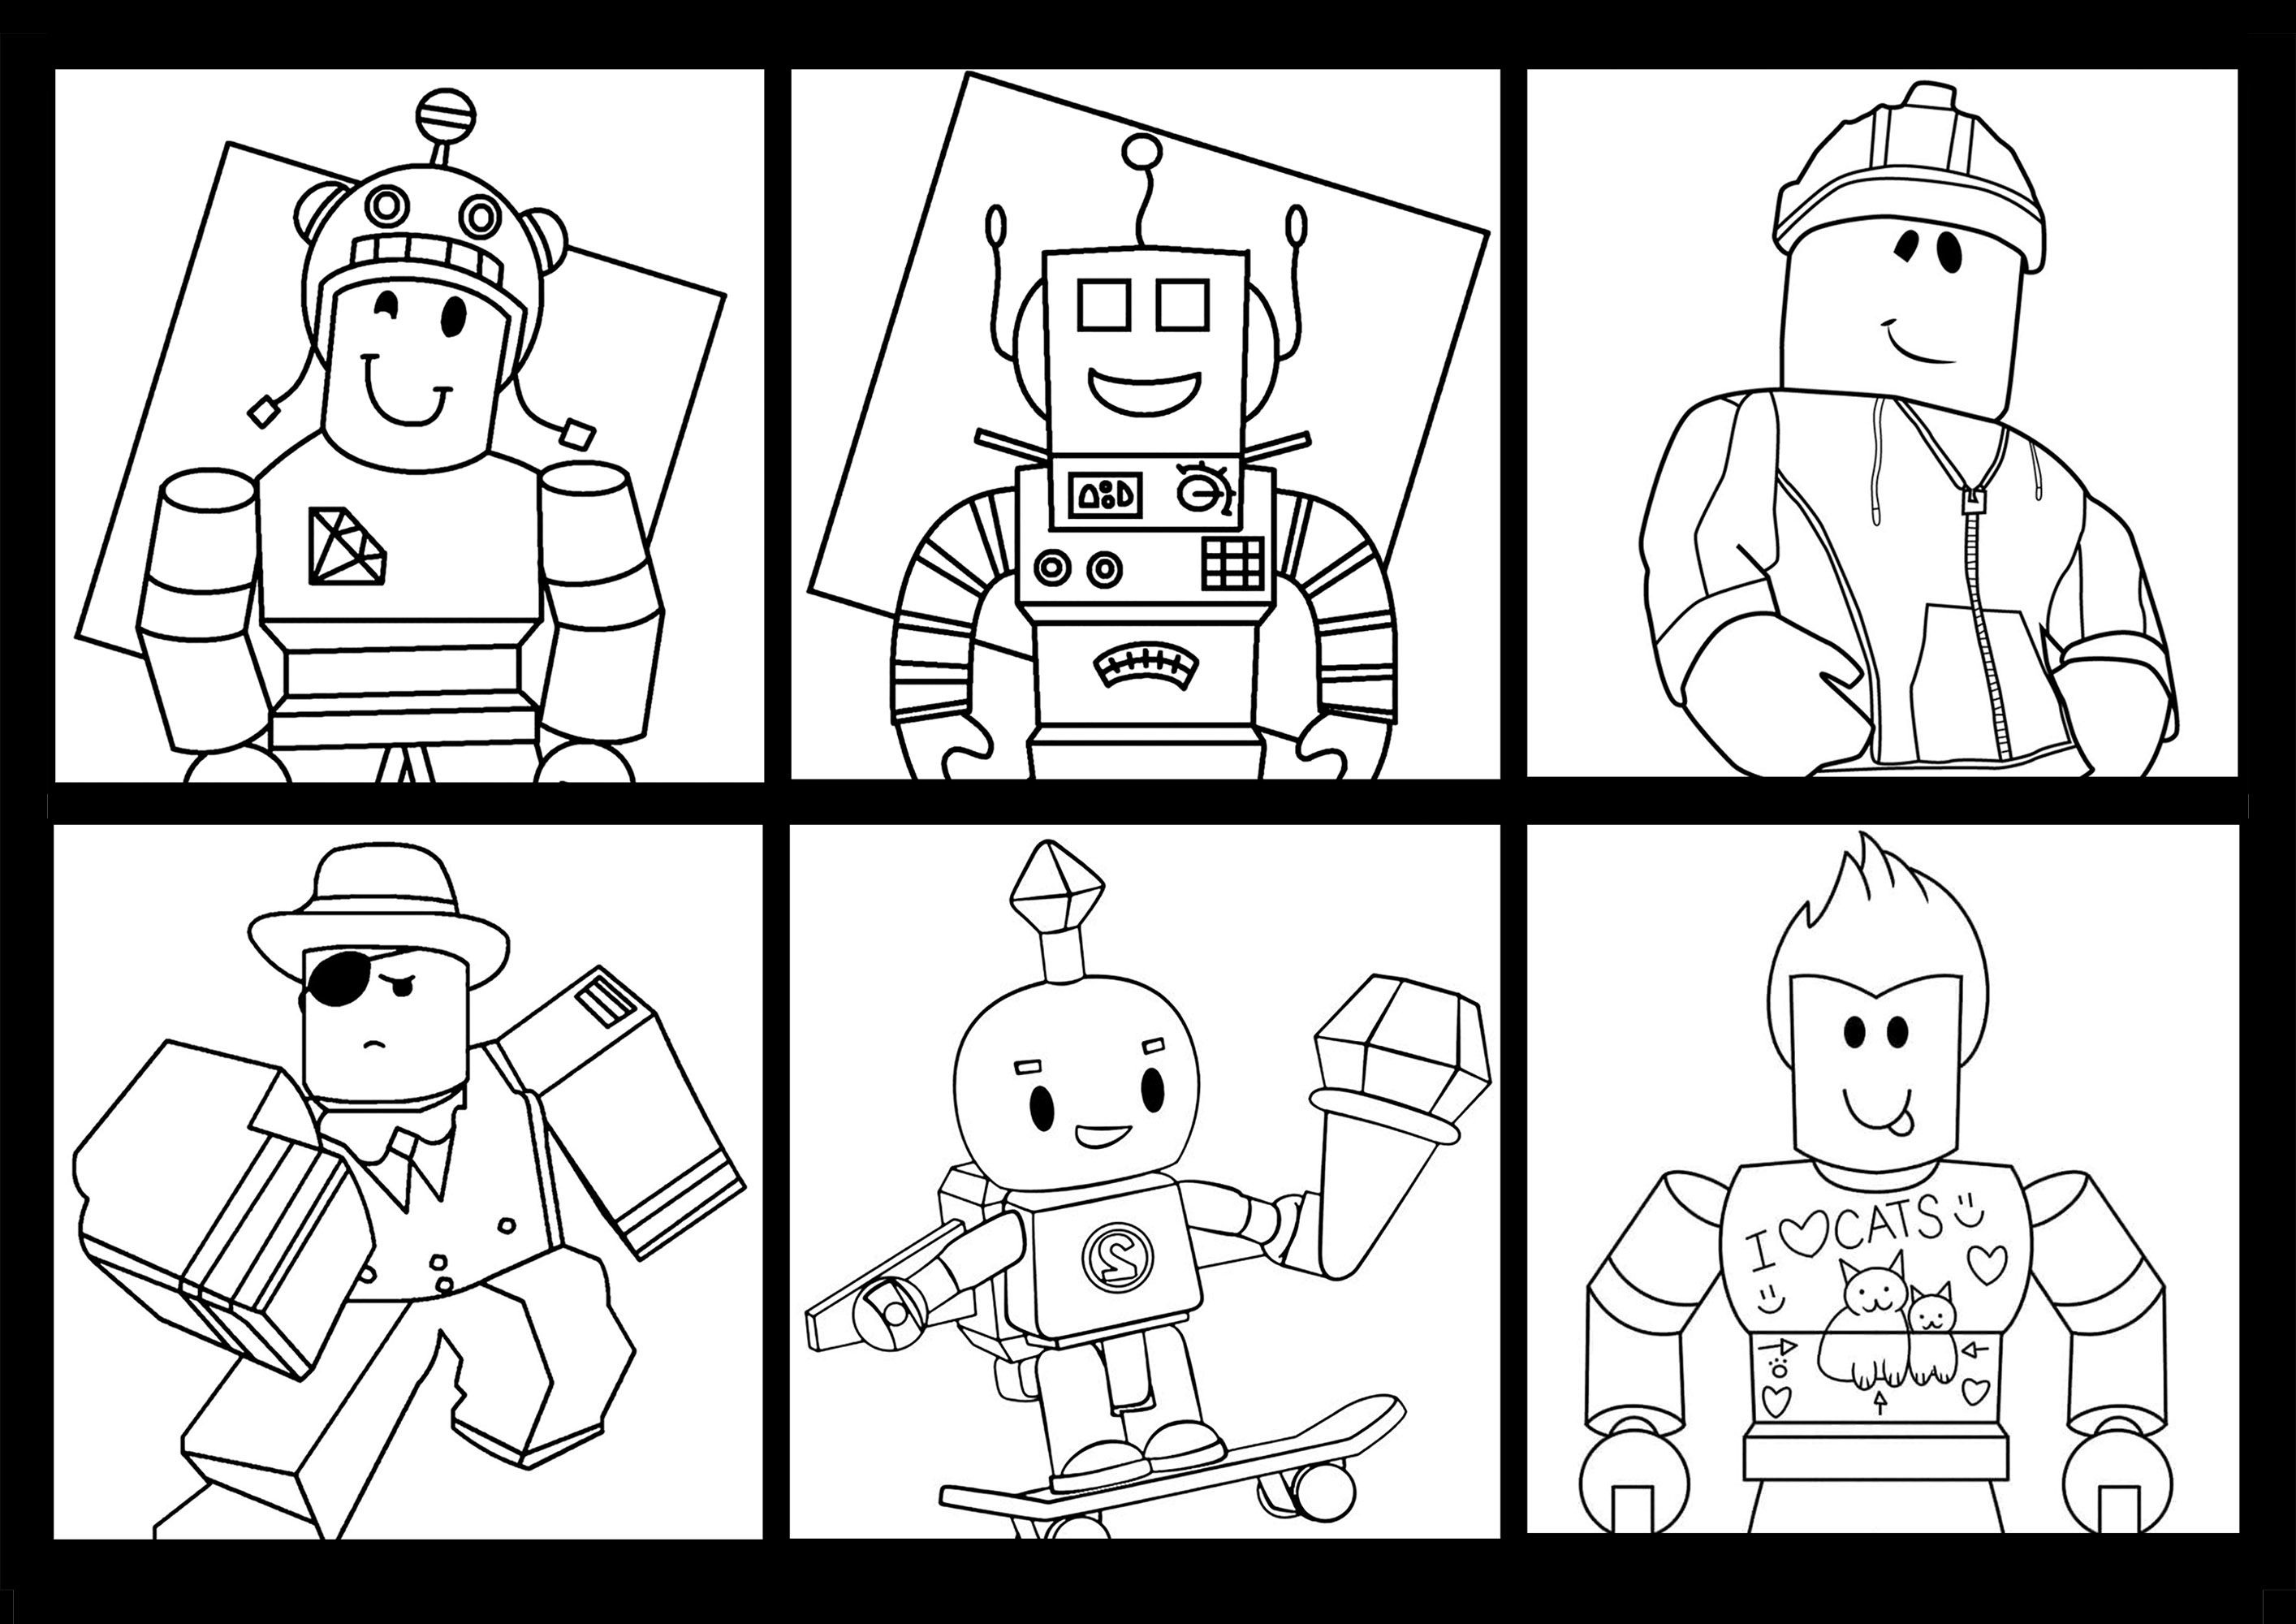 Six Roblox characters - Roblox Kids Coloring Pages